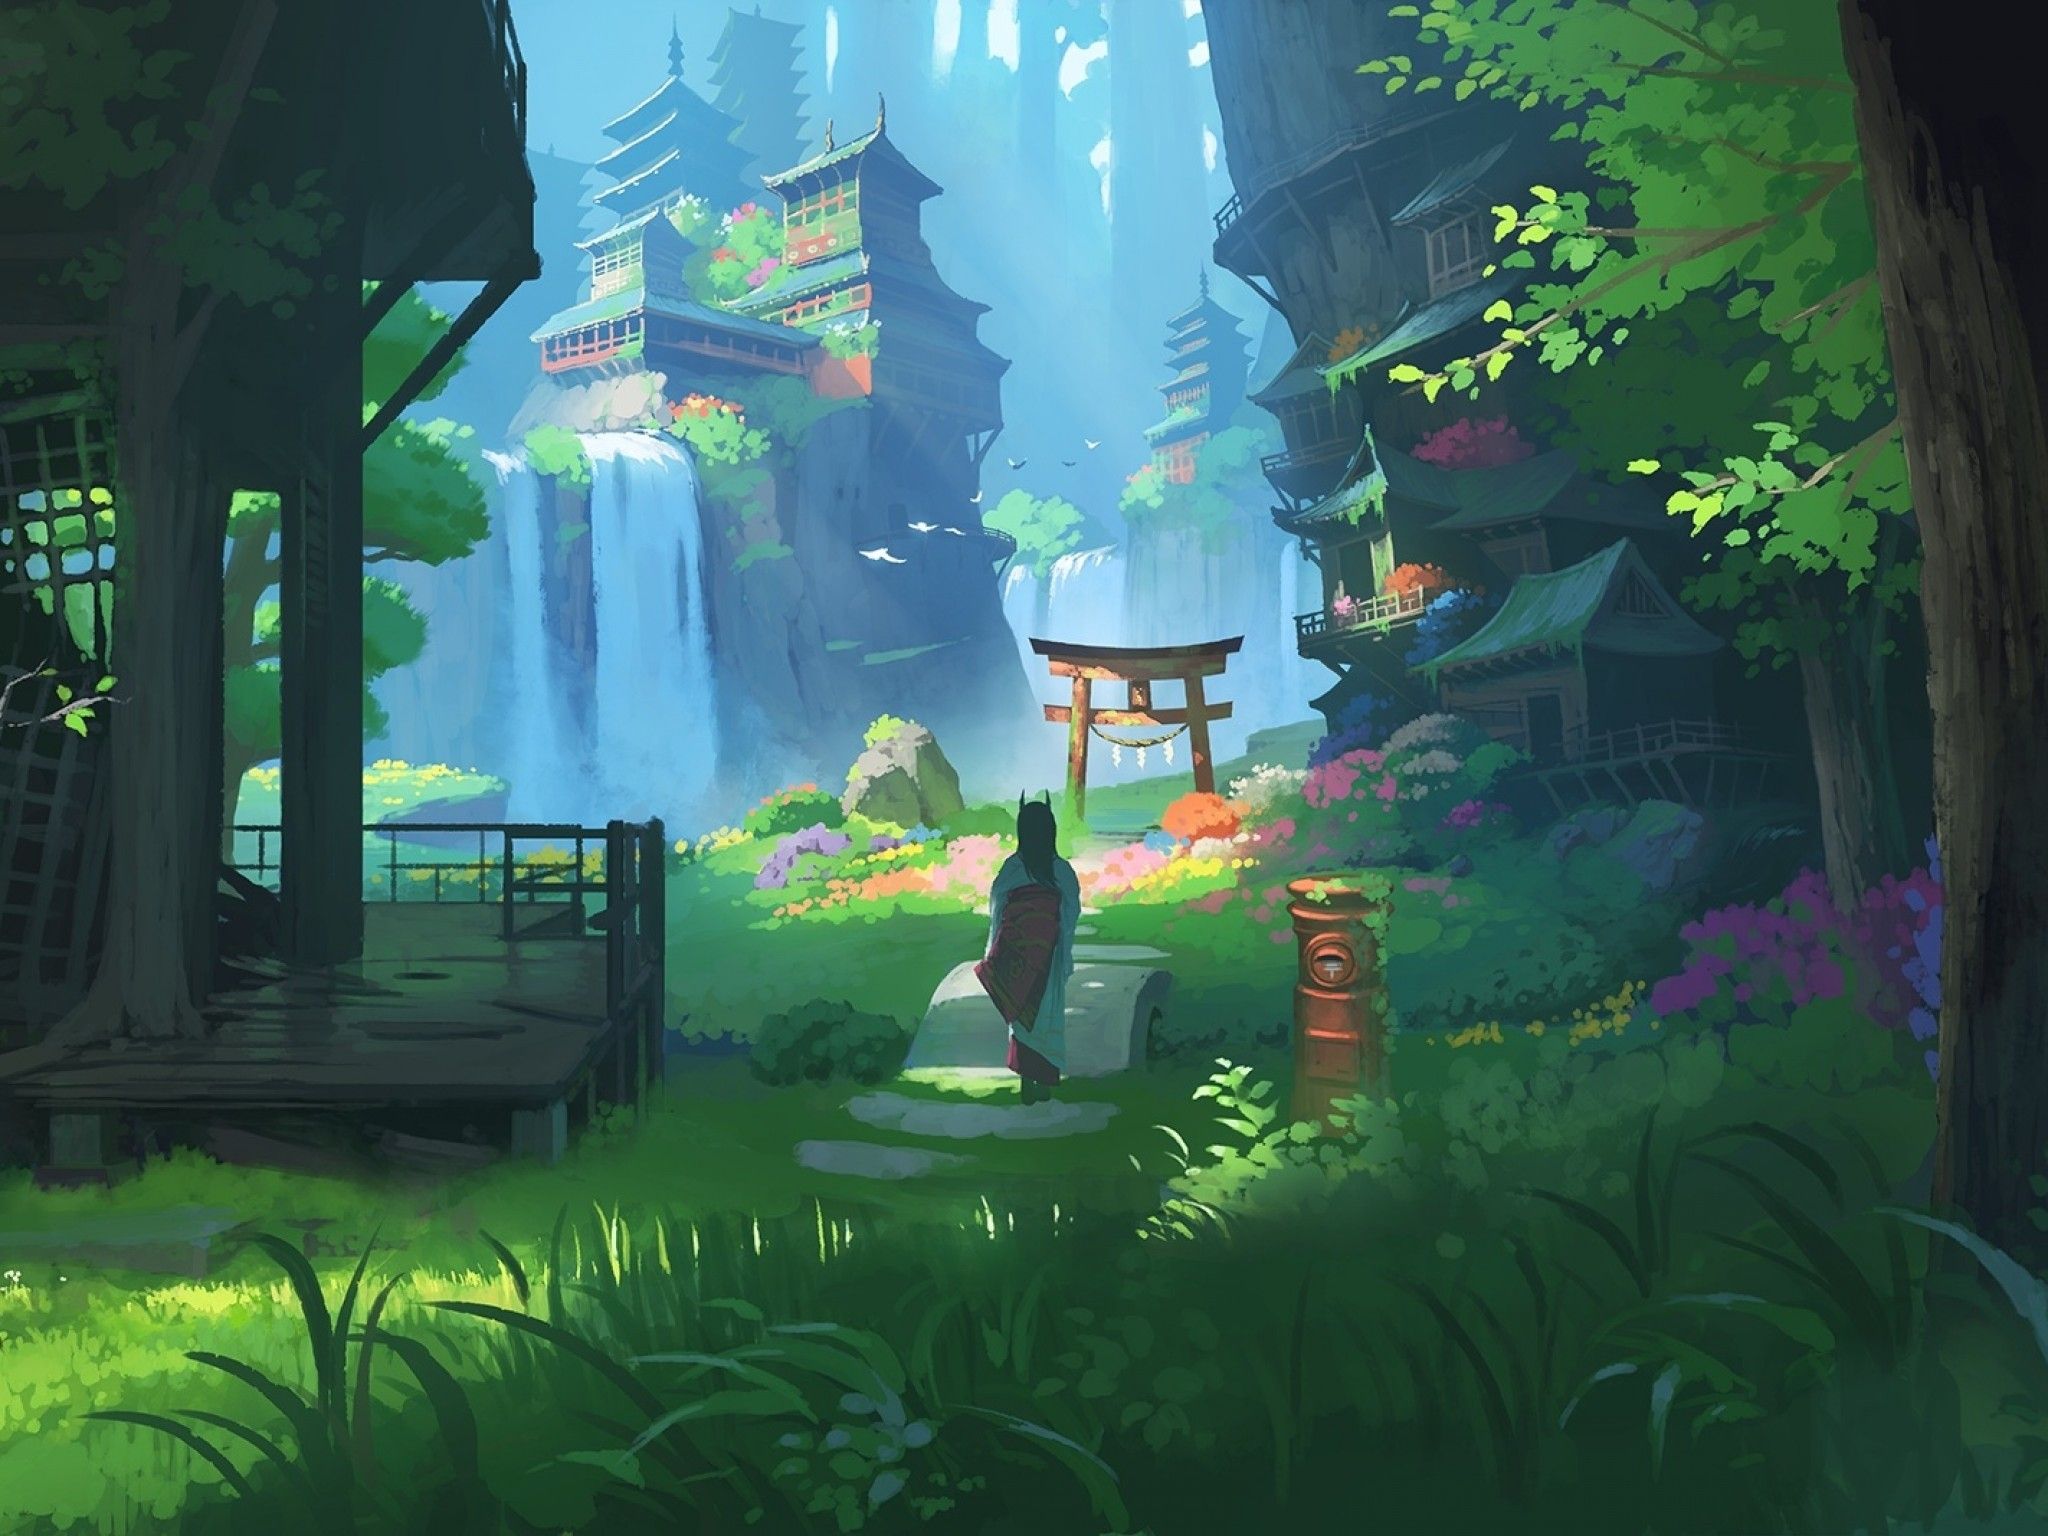 Download 2048x1536 Anime Landscape, Waterfall, Fantasy, Asian